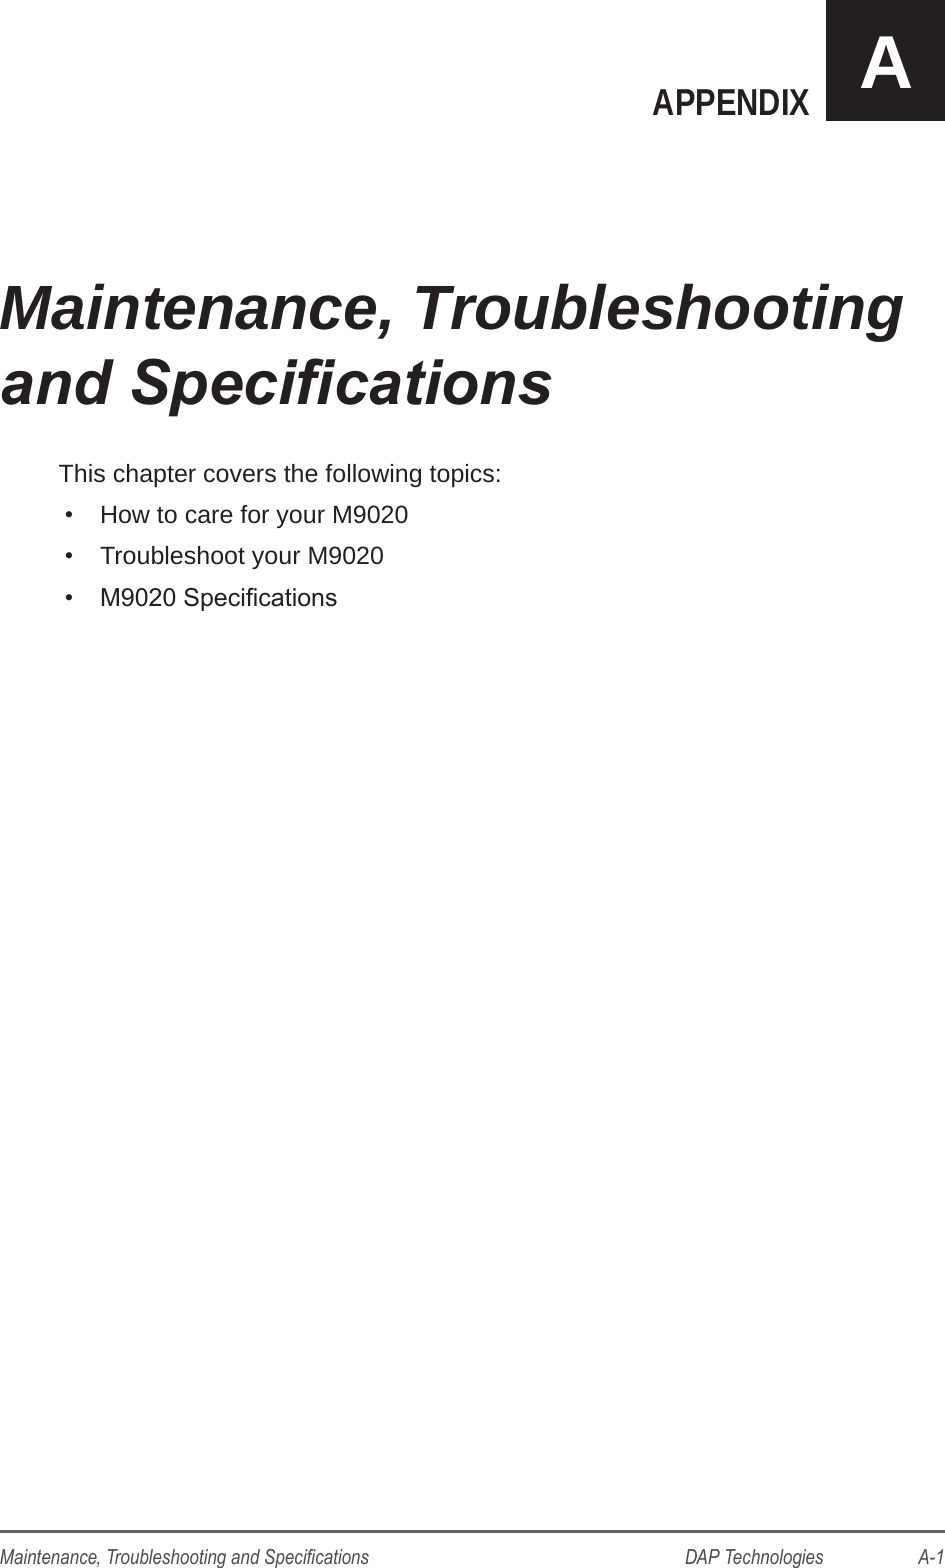 DAP Technologies                    A-1Maintenance, Troubleshooting and SpecicationsAPPENDIX AThis chapter covers the following topics:•  How to care for your M9020•  Troubleshoot your M9020•  M9020 SpecicationsMaintenance, Troubleshooting and Specications